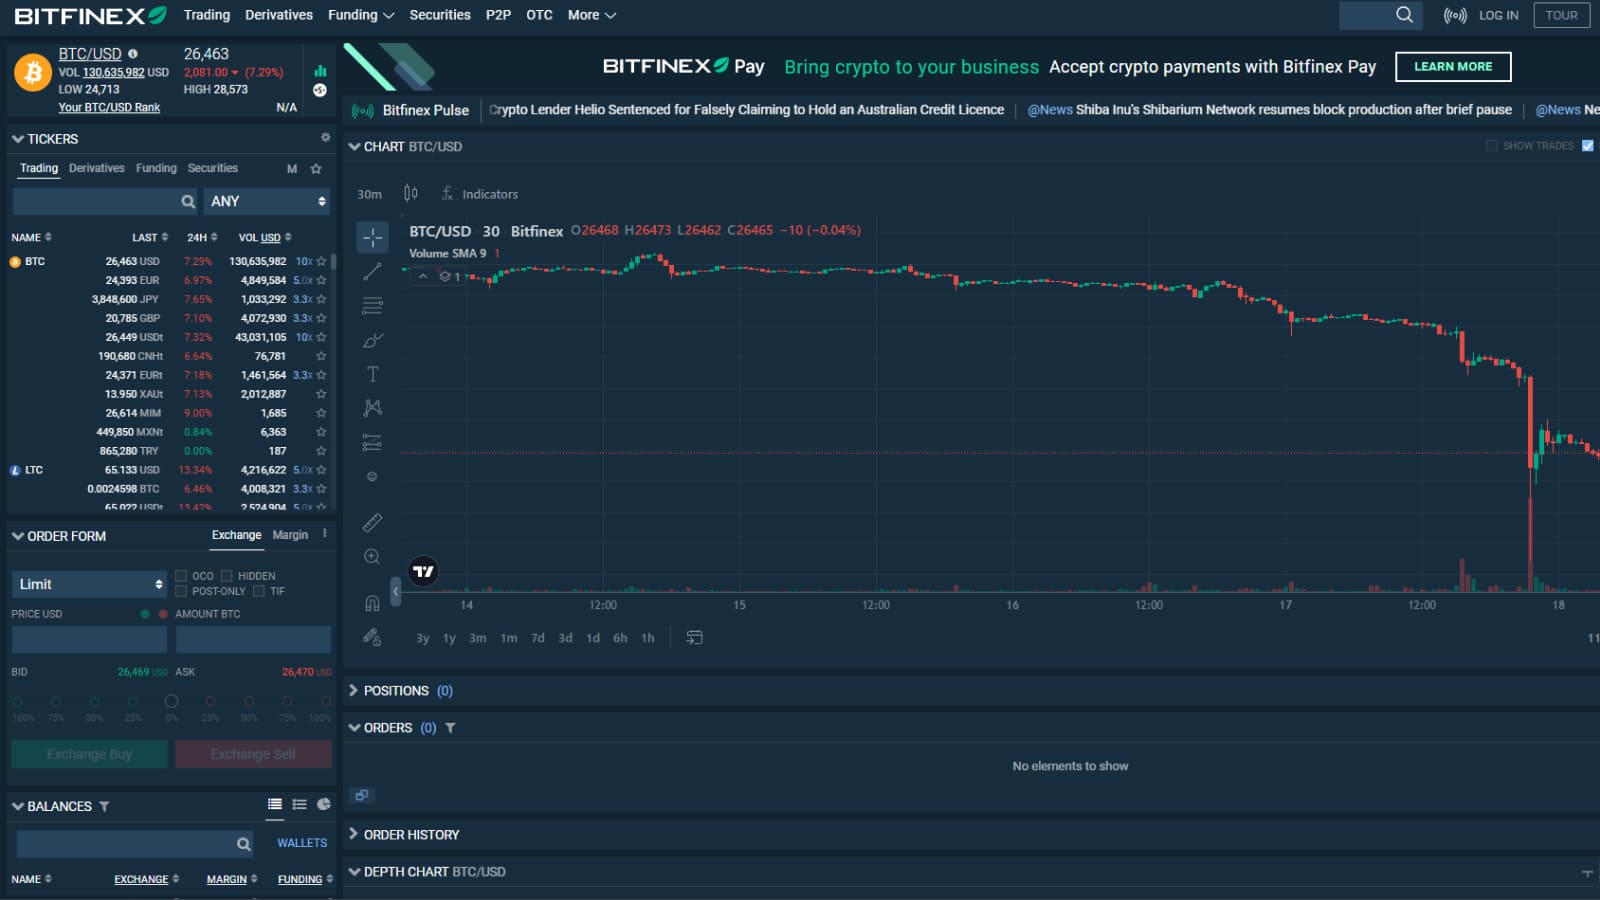 USDT launched on Bitfinex in 2014, remains stable amid crypto volatility.